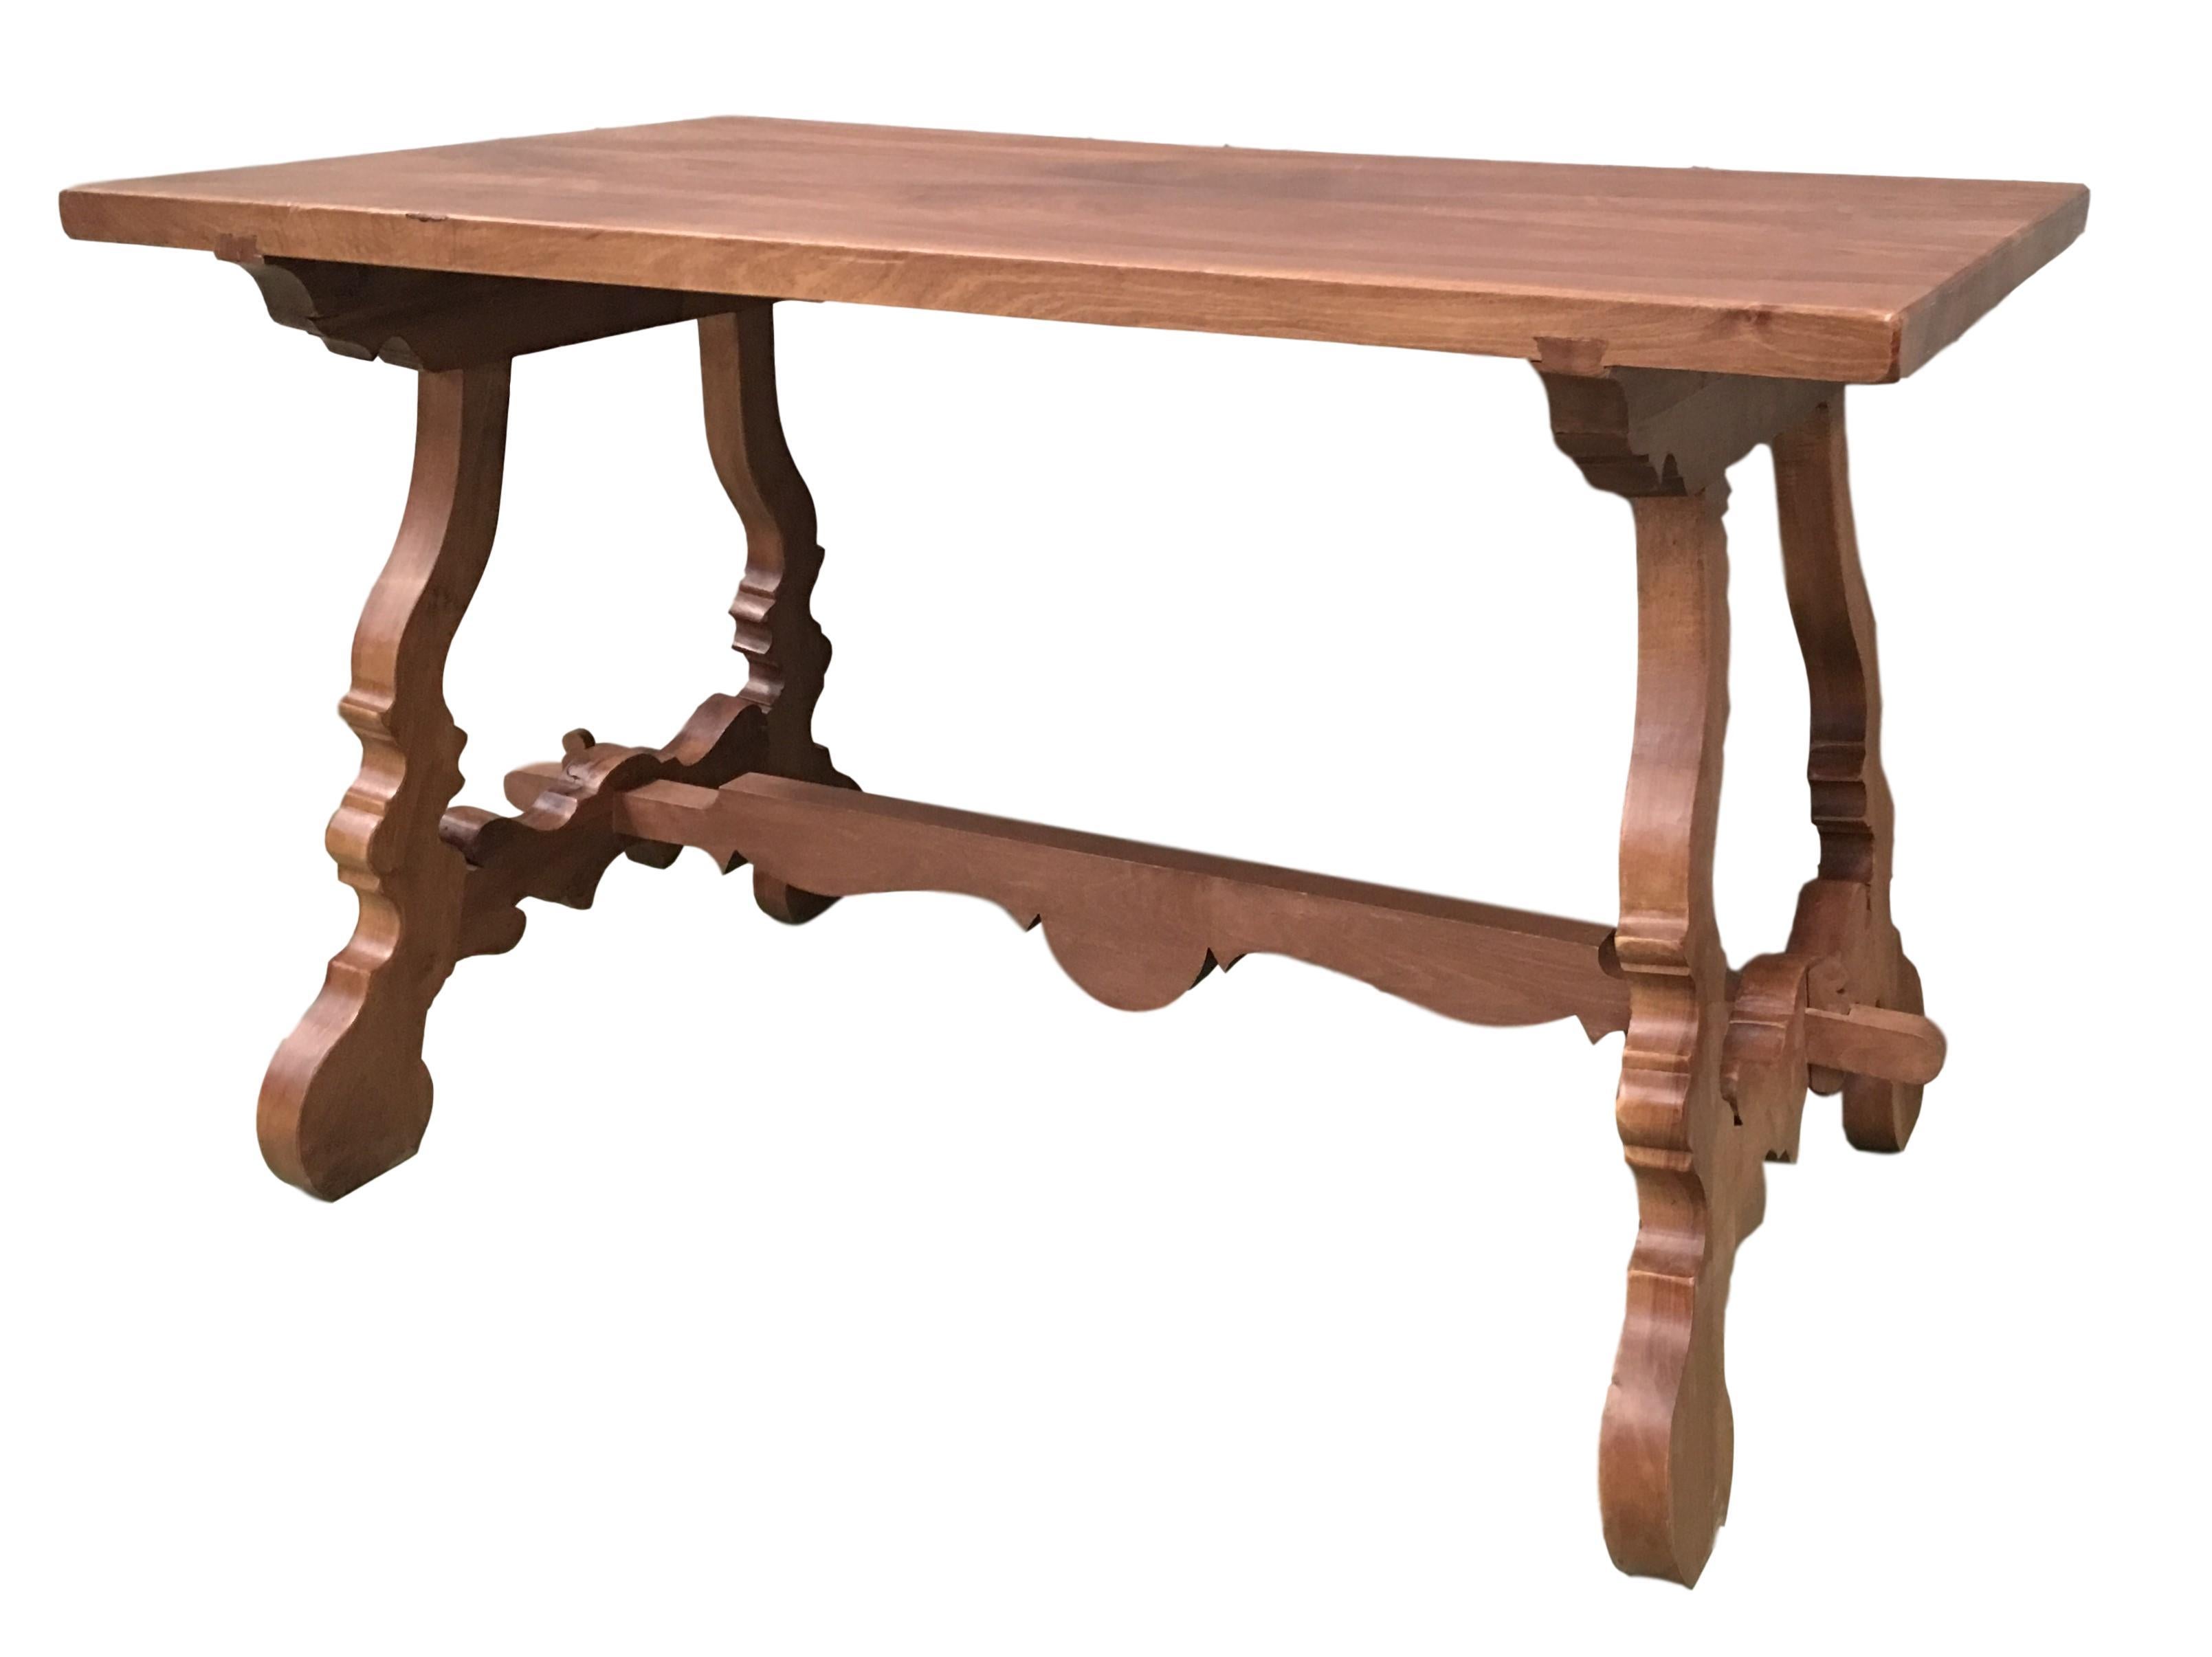 Early 20th century Spanish pine trestle table with wood stretcher.